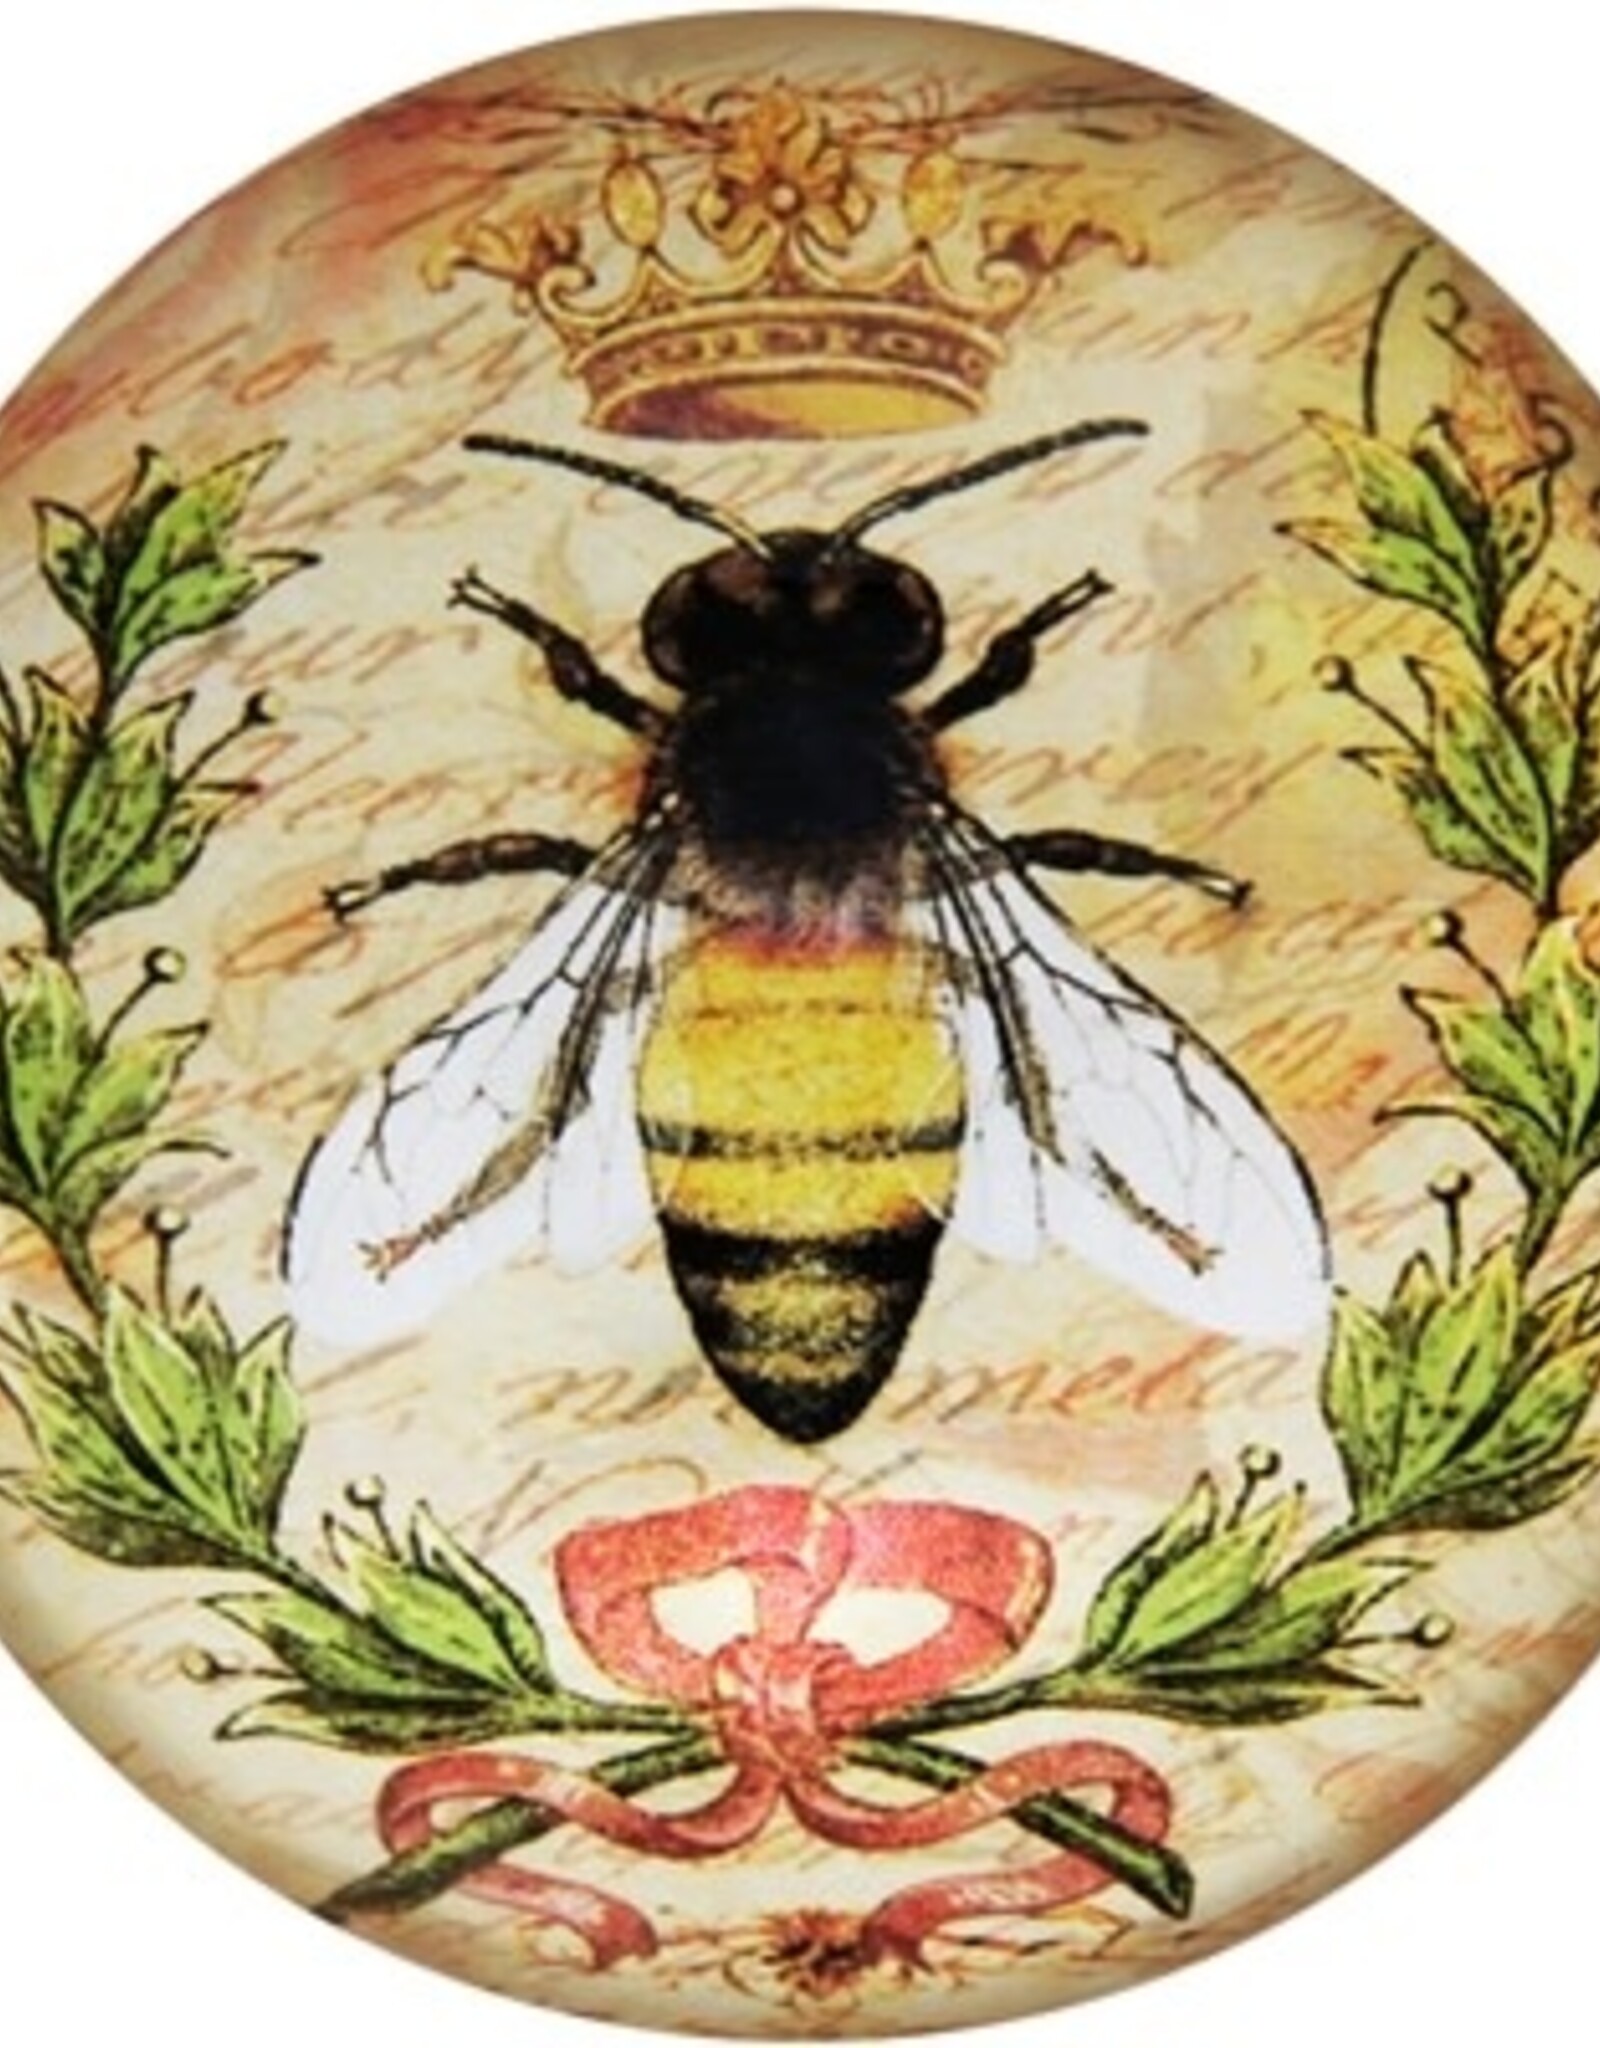 PAPERWEIGHT-GLASS DOME, QUEEN BEE